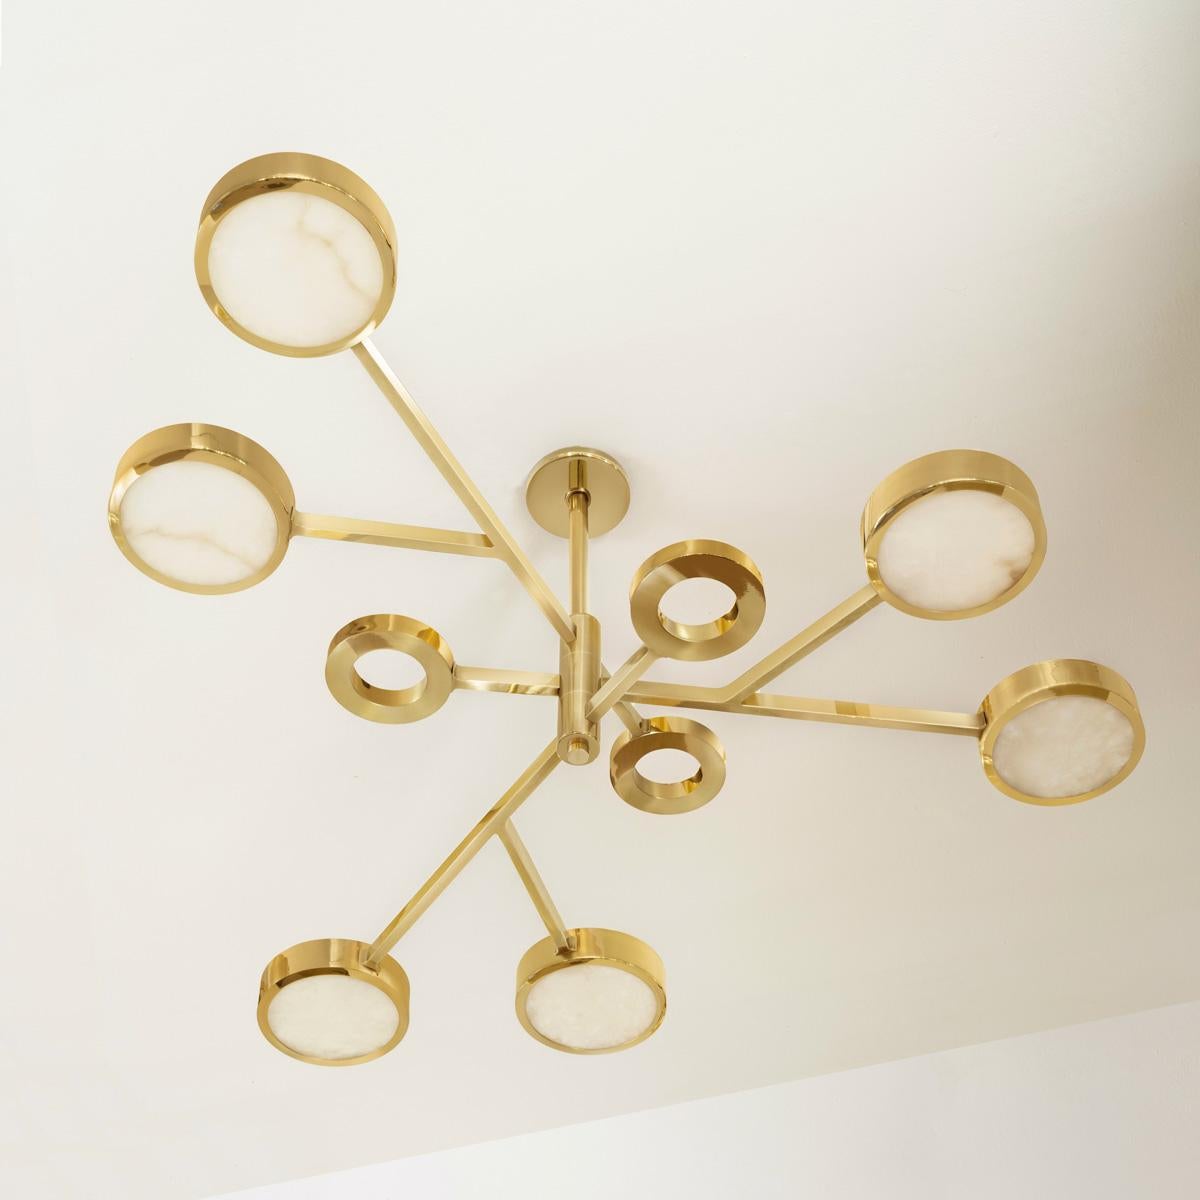 The Volterra ceiling light is an ode to the historic Tuscan city by the same name known for its striking architecture and its precious stone quarries. The fixture exemplifies these qualities with its sculptural counter-balance design, cast brass